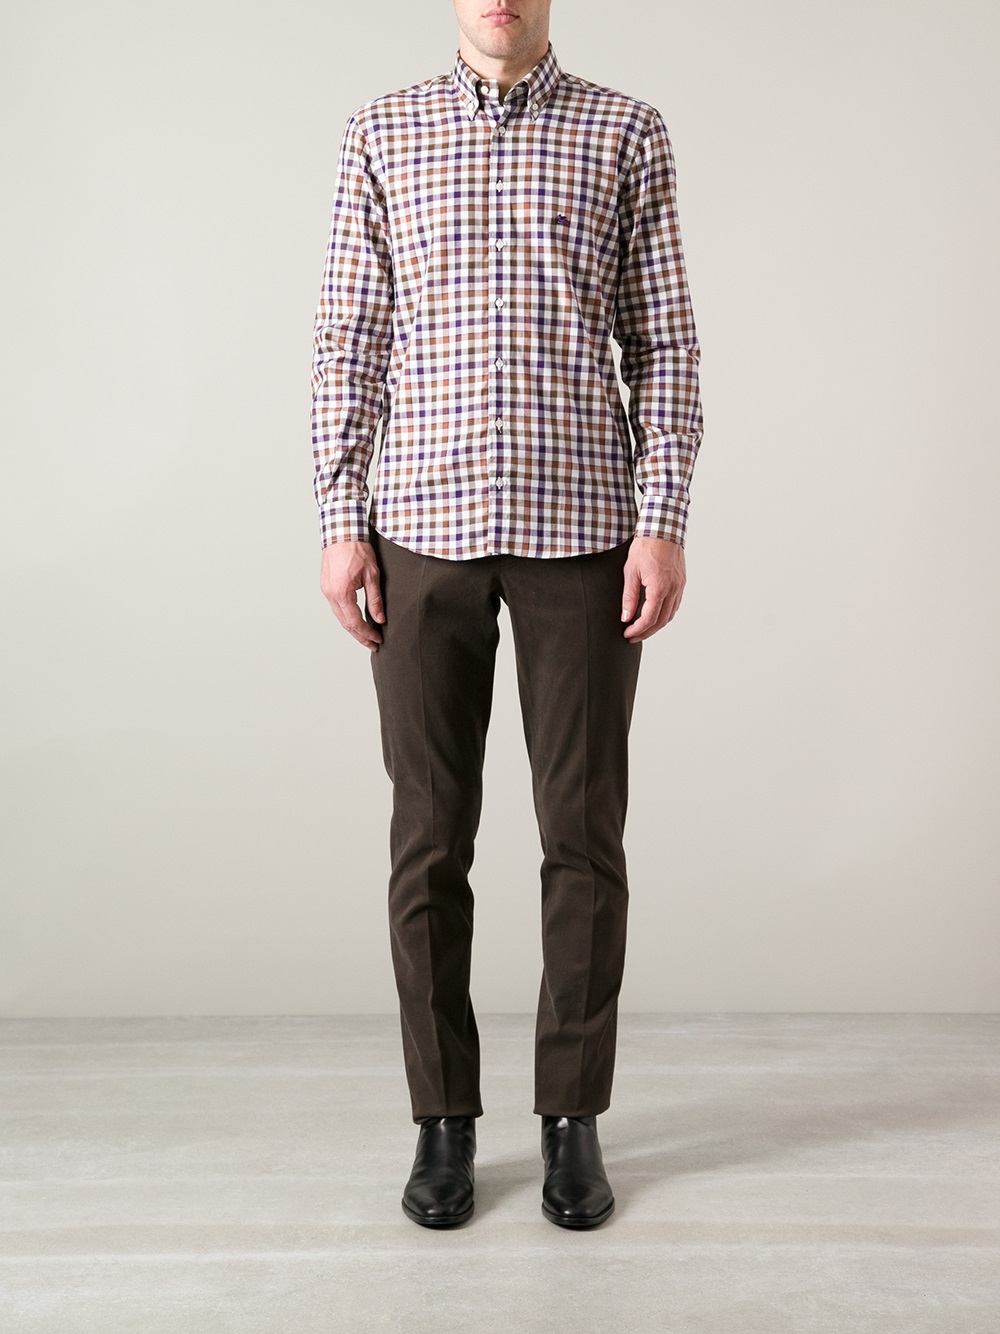 Etro Checked Dress Shirt in Brown for Men - Lyst